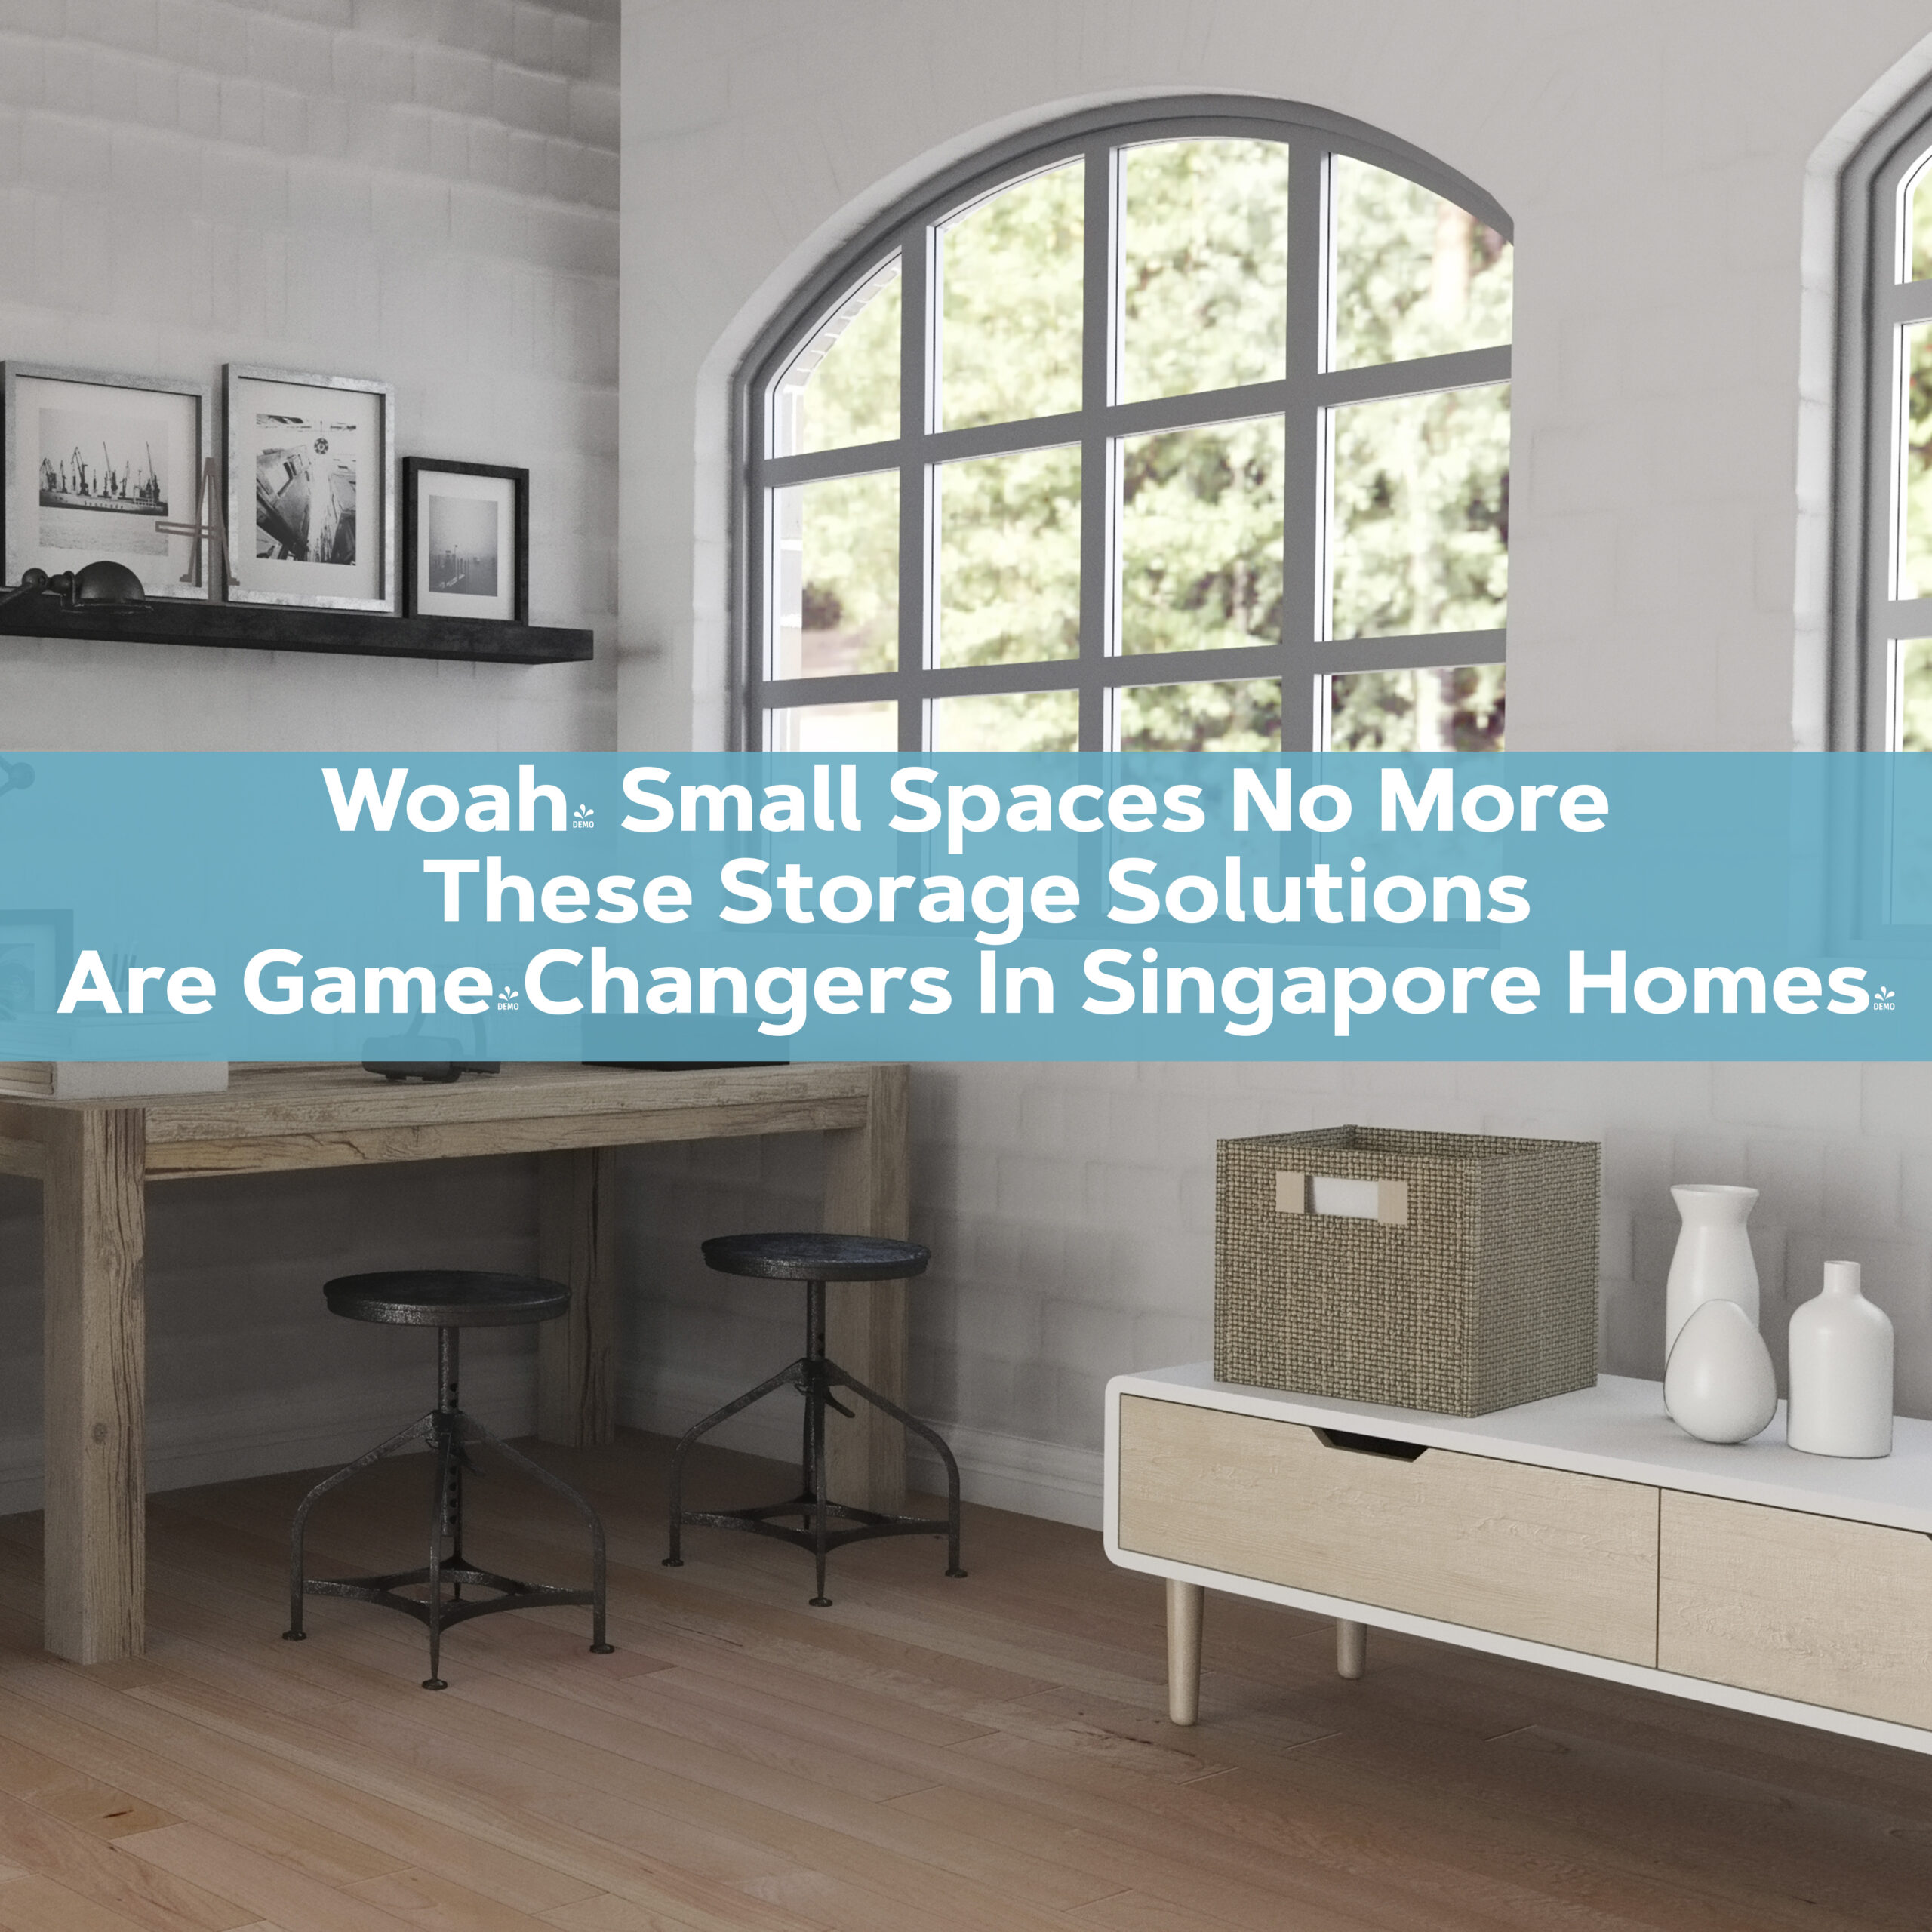 Woah! Small Spaces No More - These Storage Solutions Are Game-Changers In Singapore Homes!